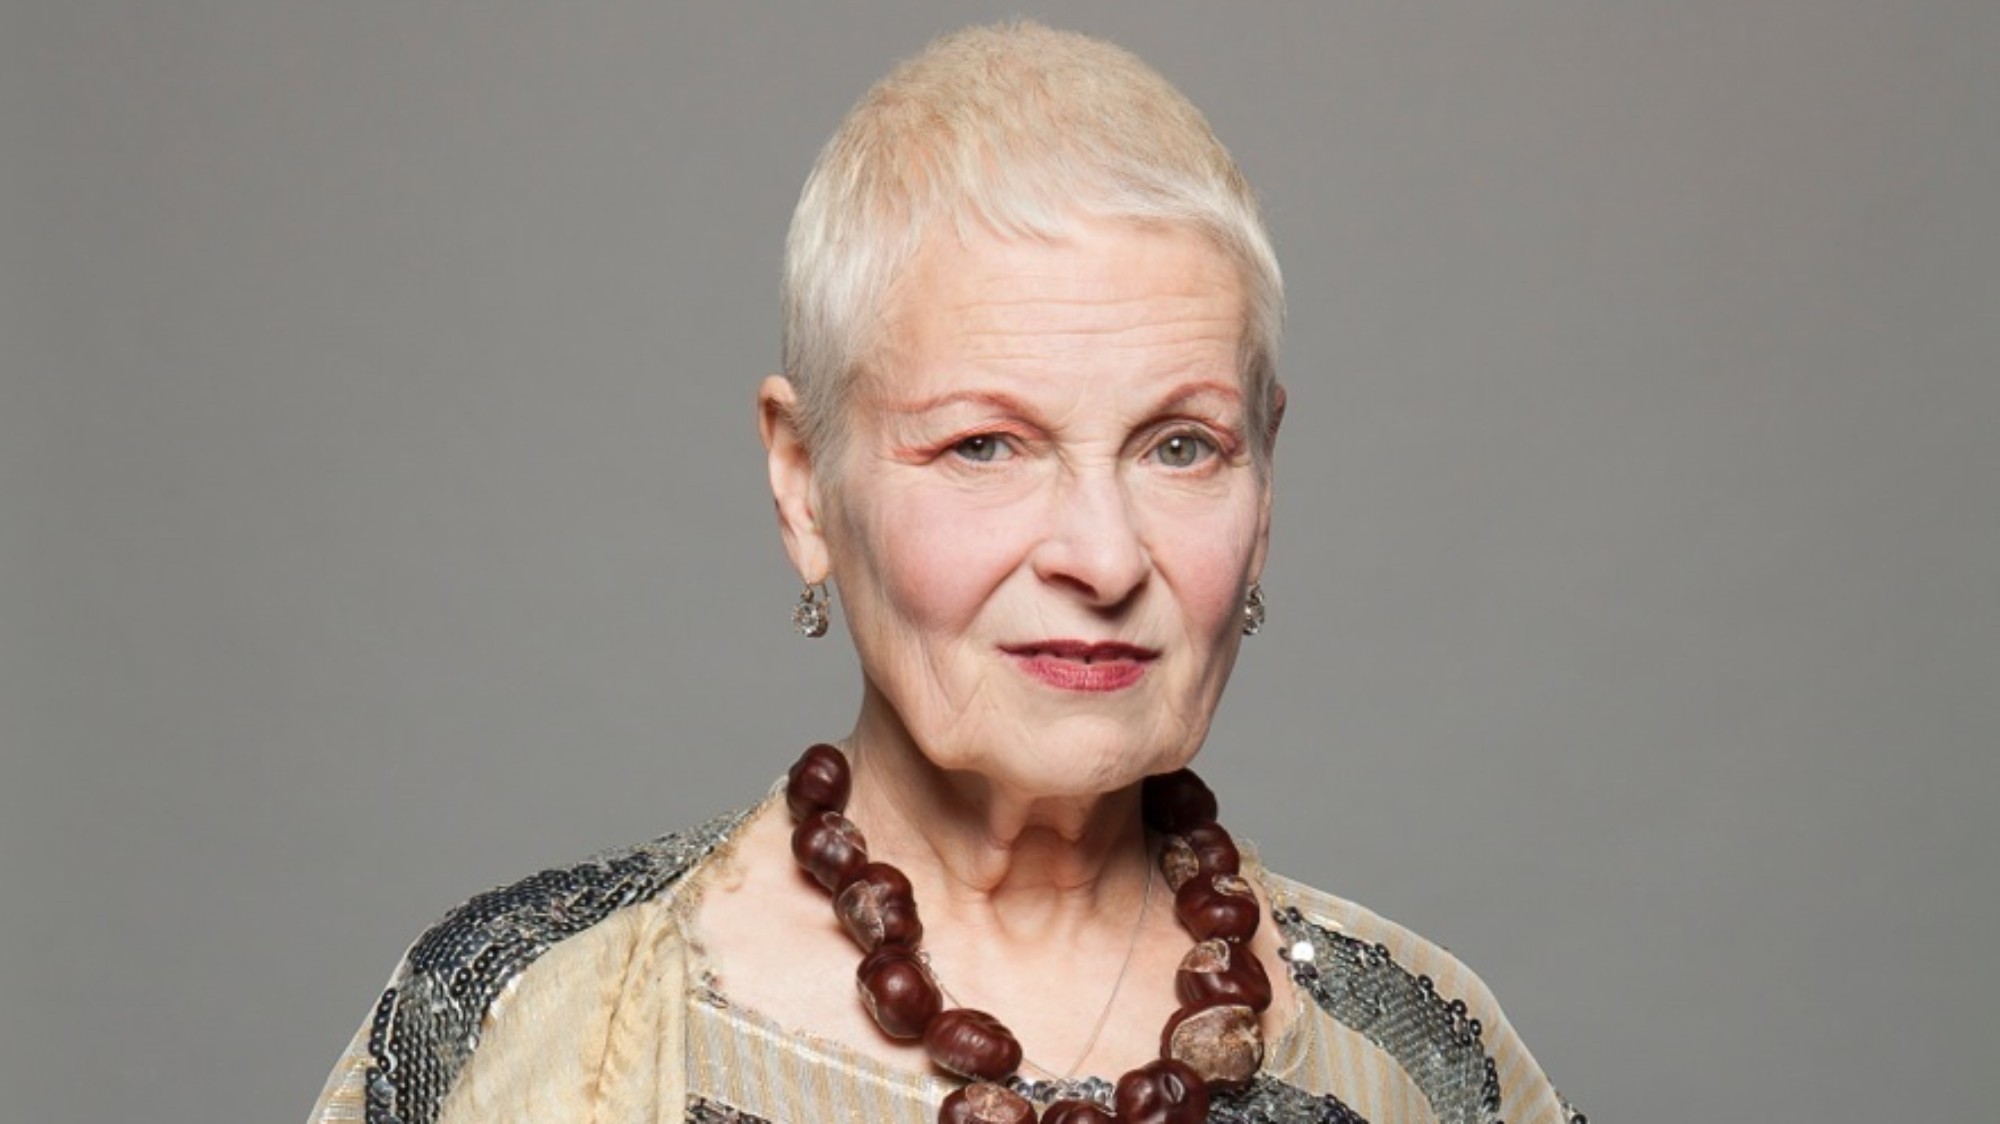 vivienne-westwood-asks-what-the-frack-is-up-with-our-government-1412779892.jpeg